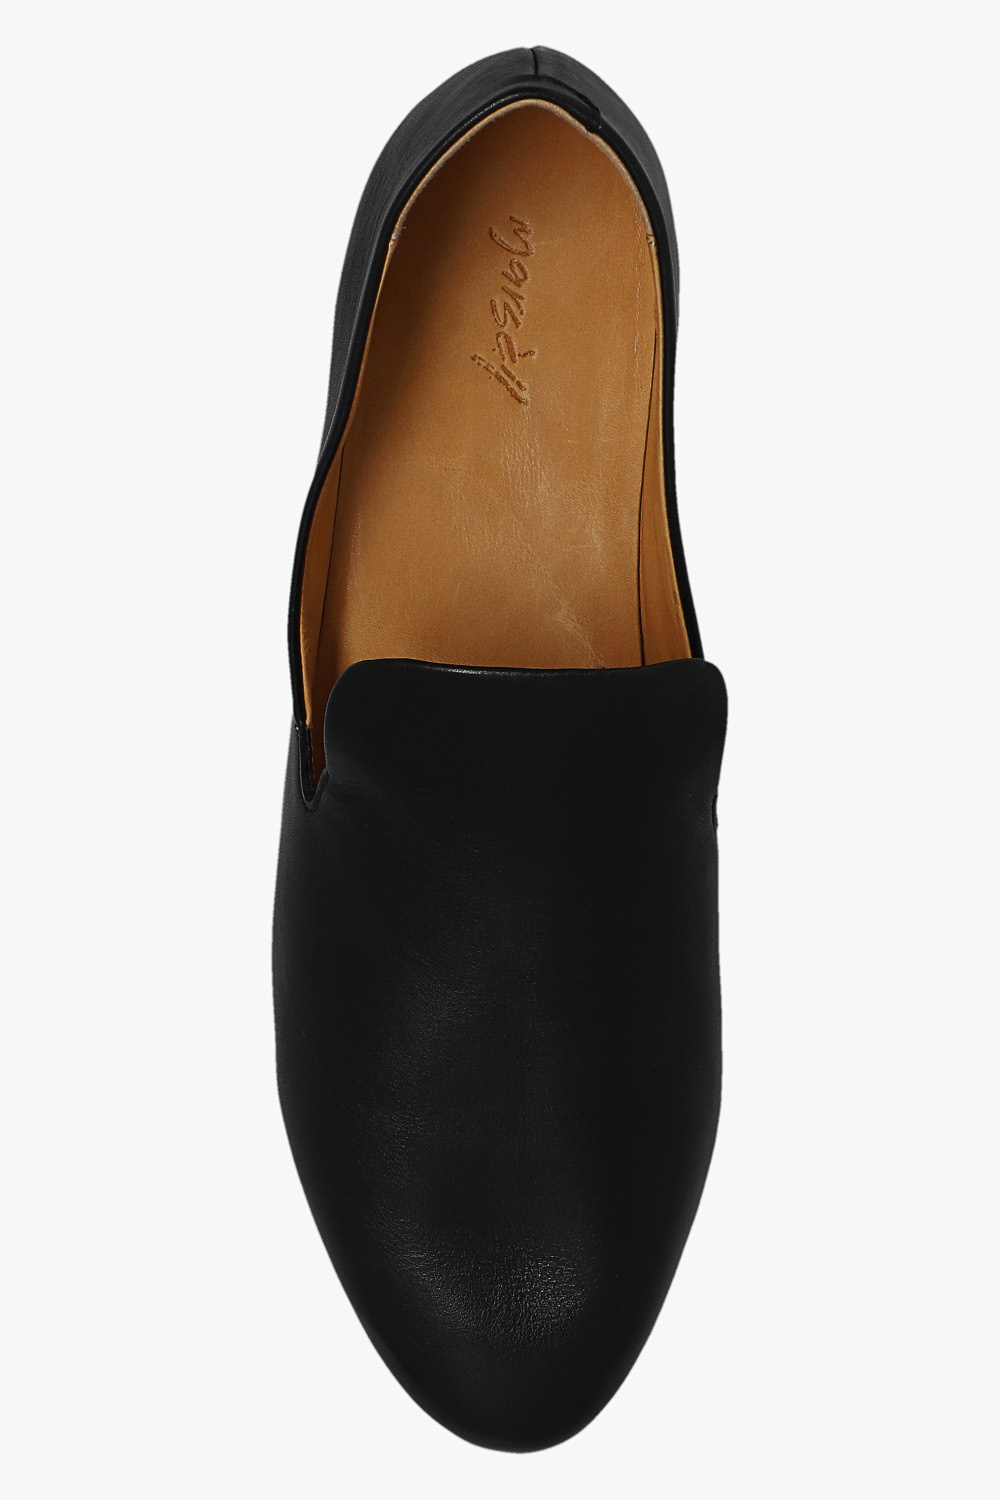 Marsell ‘Coltellino’ leather shoes